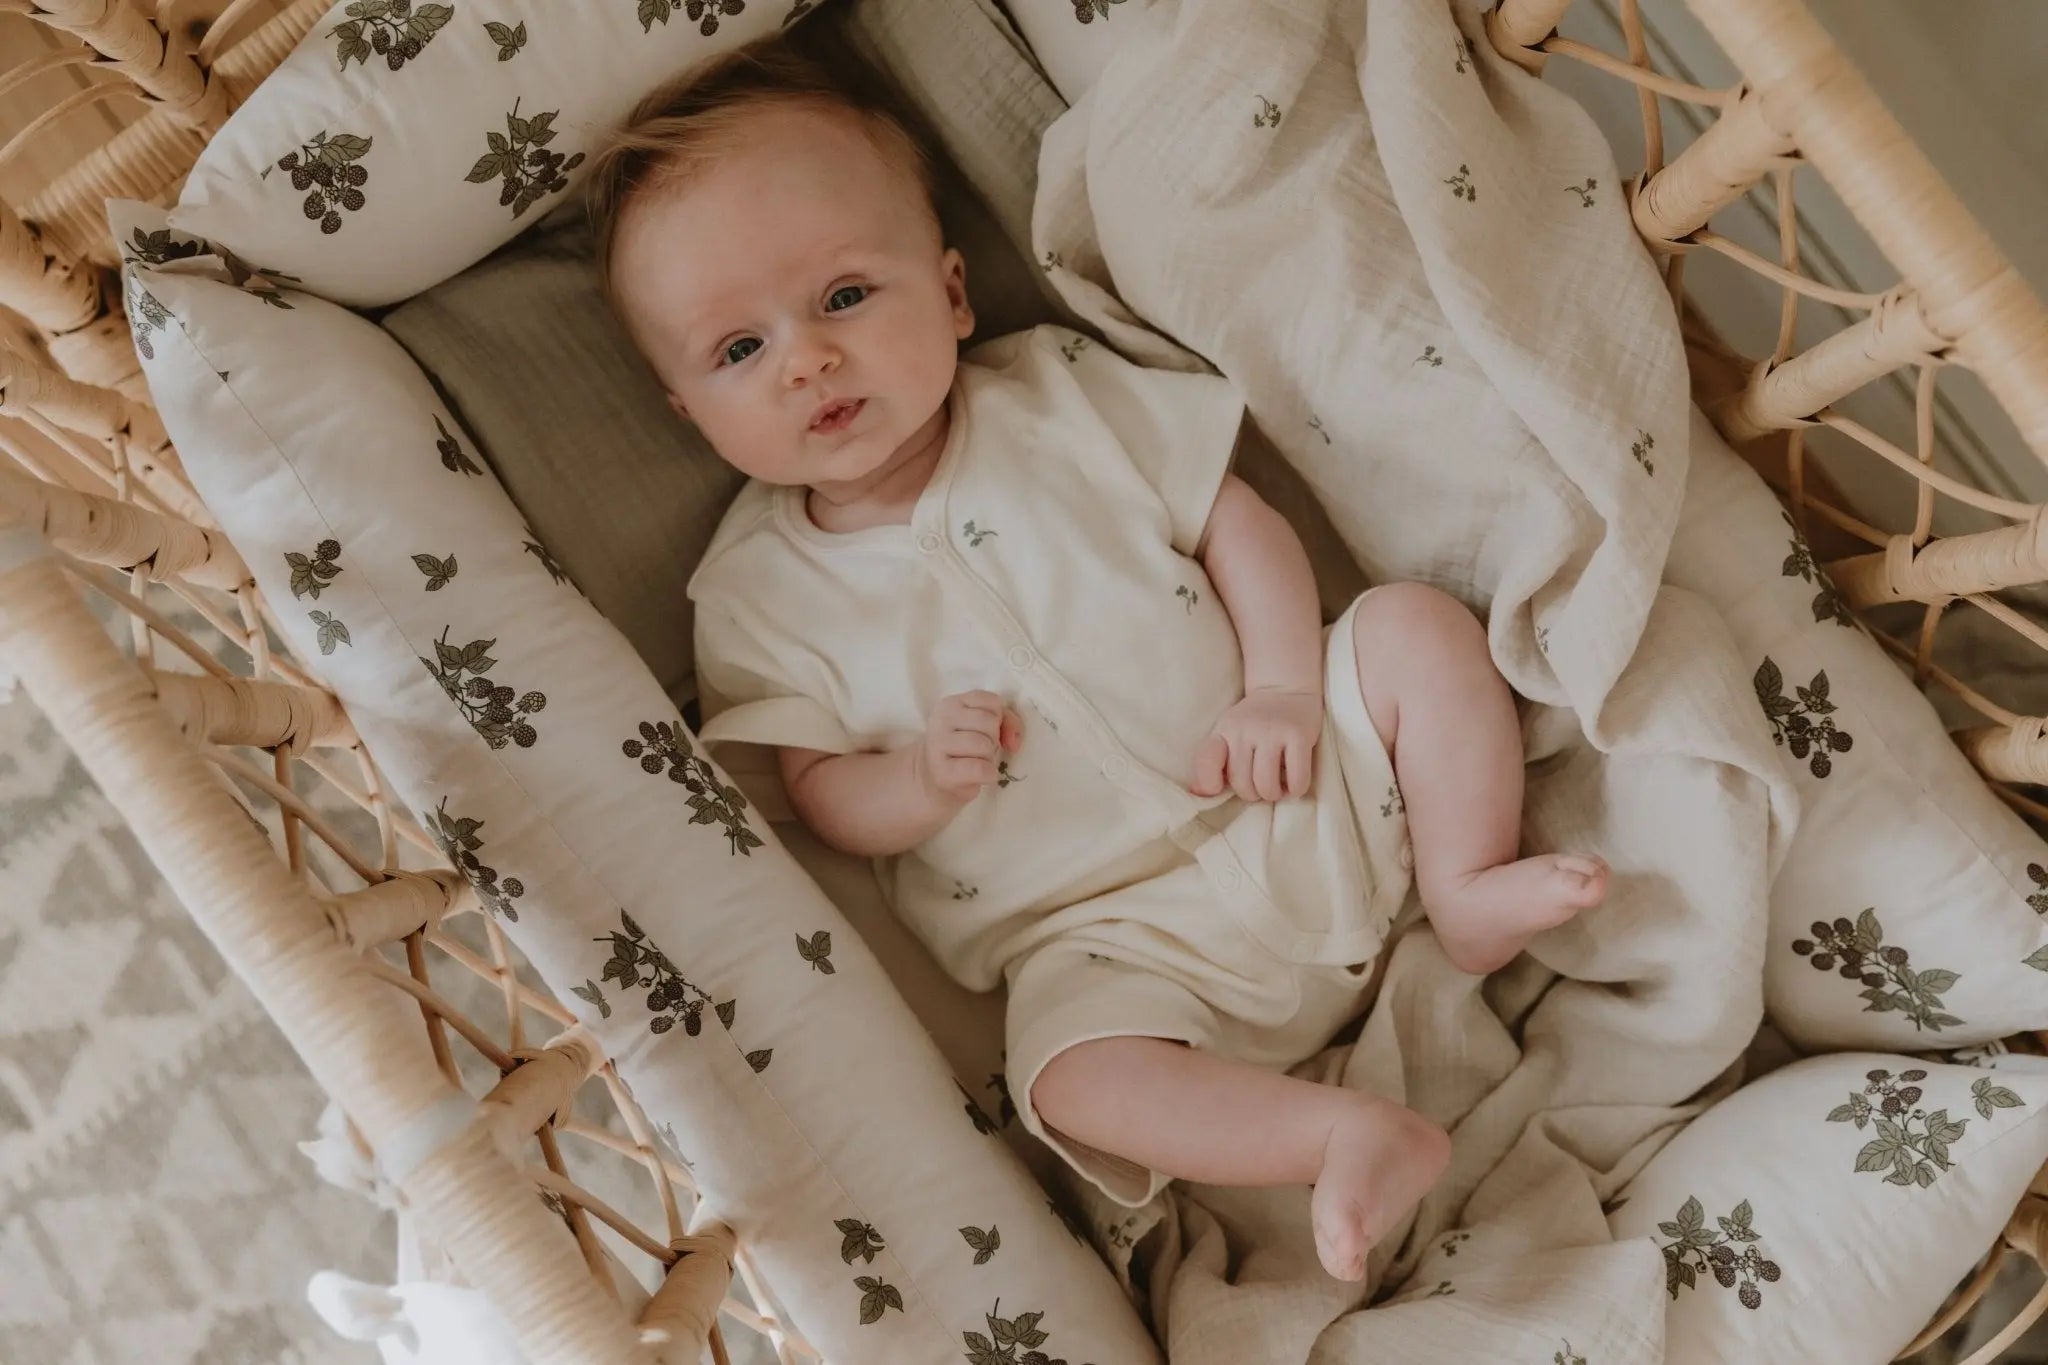 Jersey Romper, Comfy Baby Outfit, Cute and Cozy, Perfect for Playtime and Naps  Garbo and Friends   